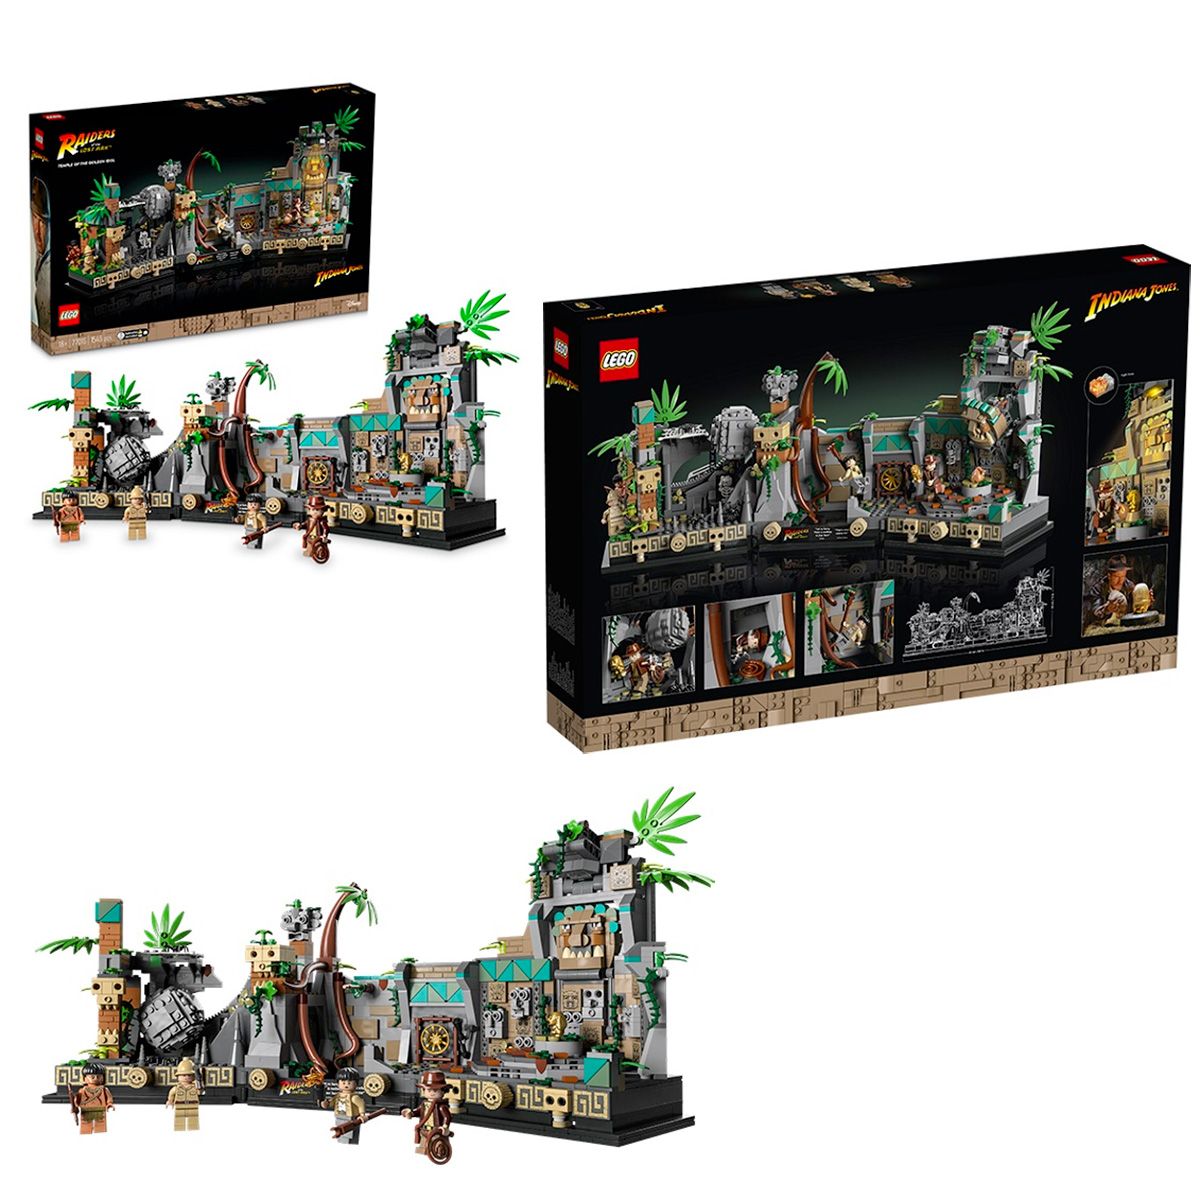 LEGO Indiana Jones Sets Officially Announced - The Brick Fan